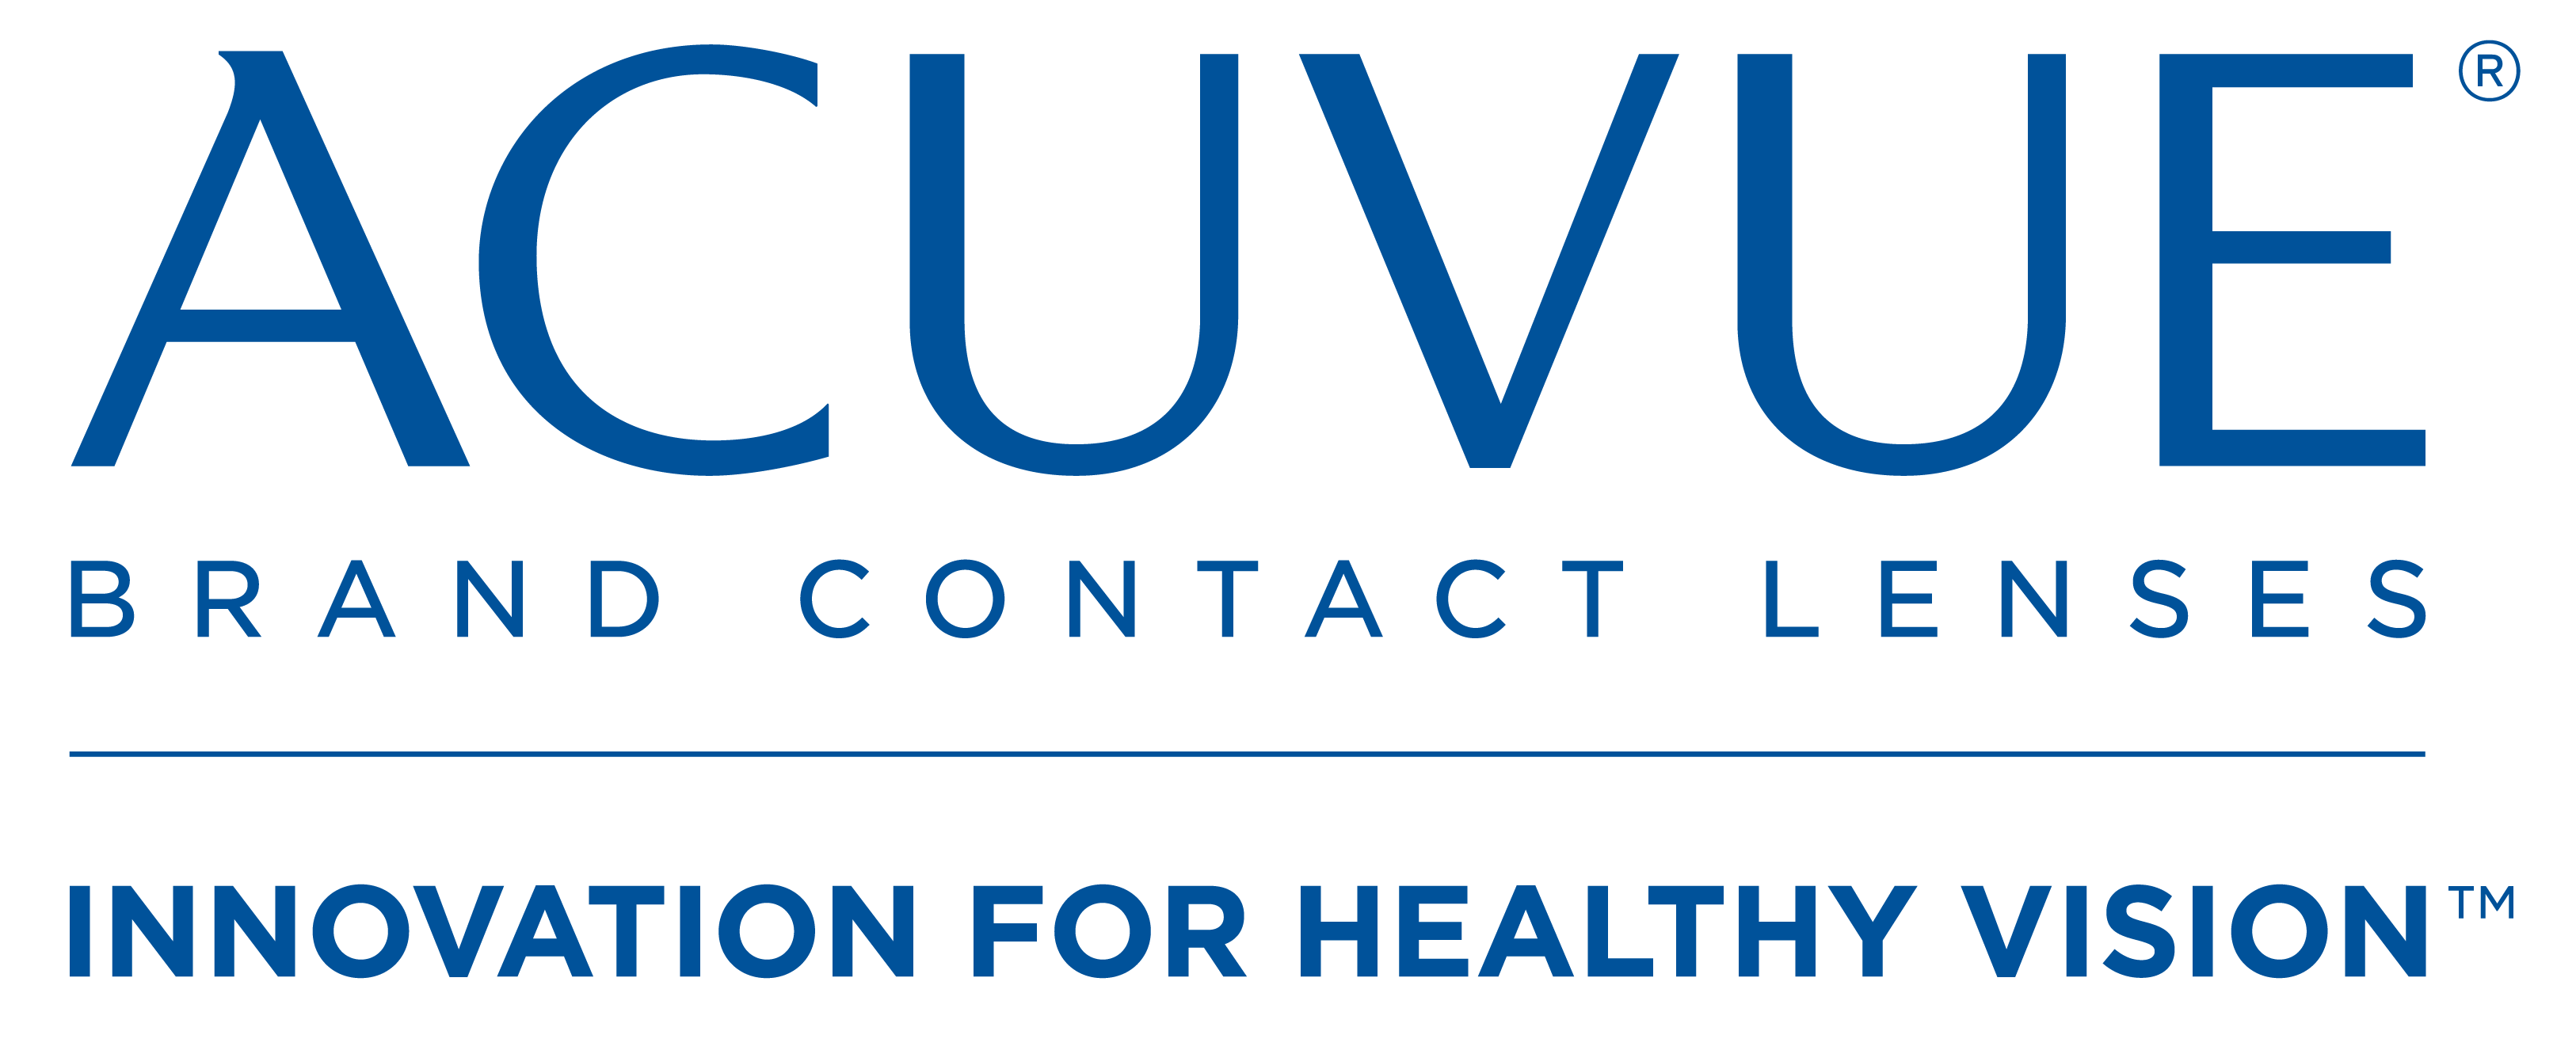 Acuvue Logo - Acuvue logo png » PNG Image